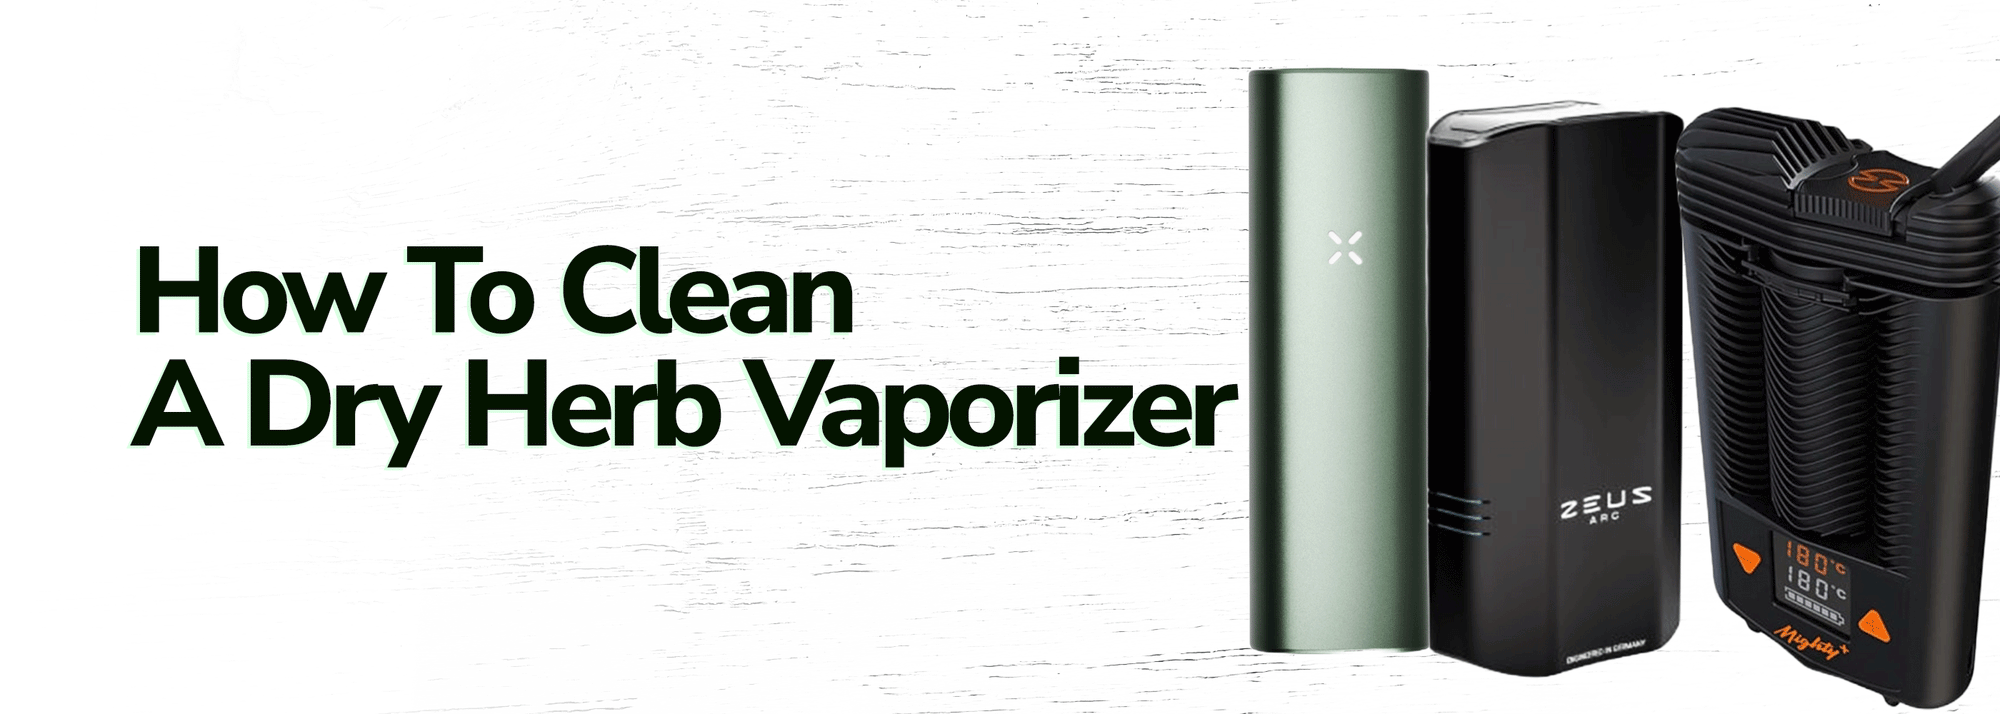 How To Clean A Herb Vaporizer - Wick and Wire Co, Melbourne Australia